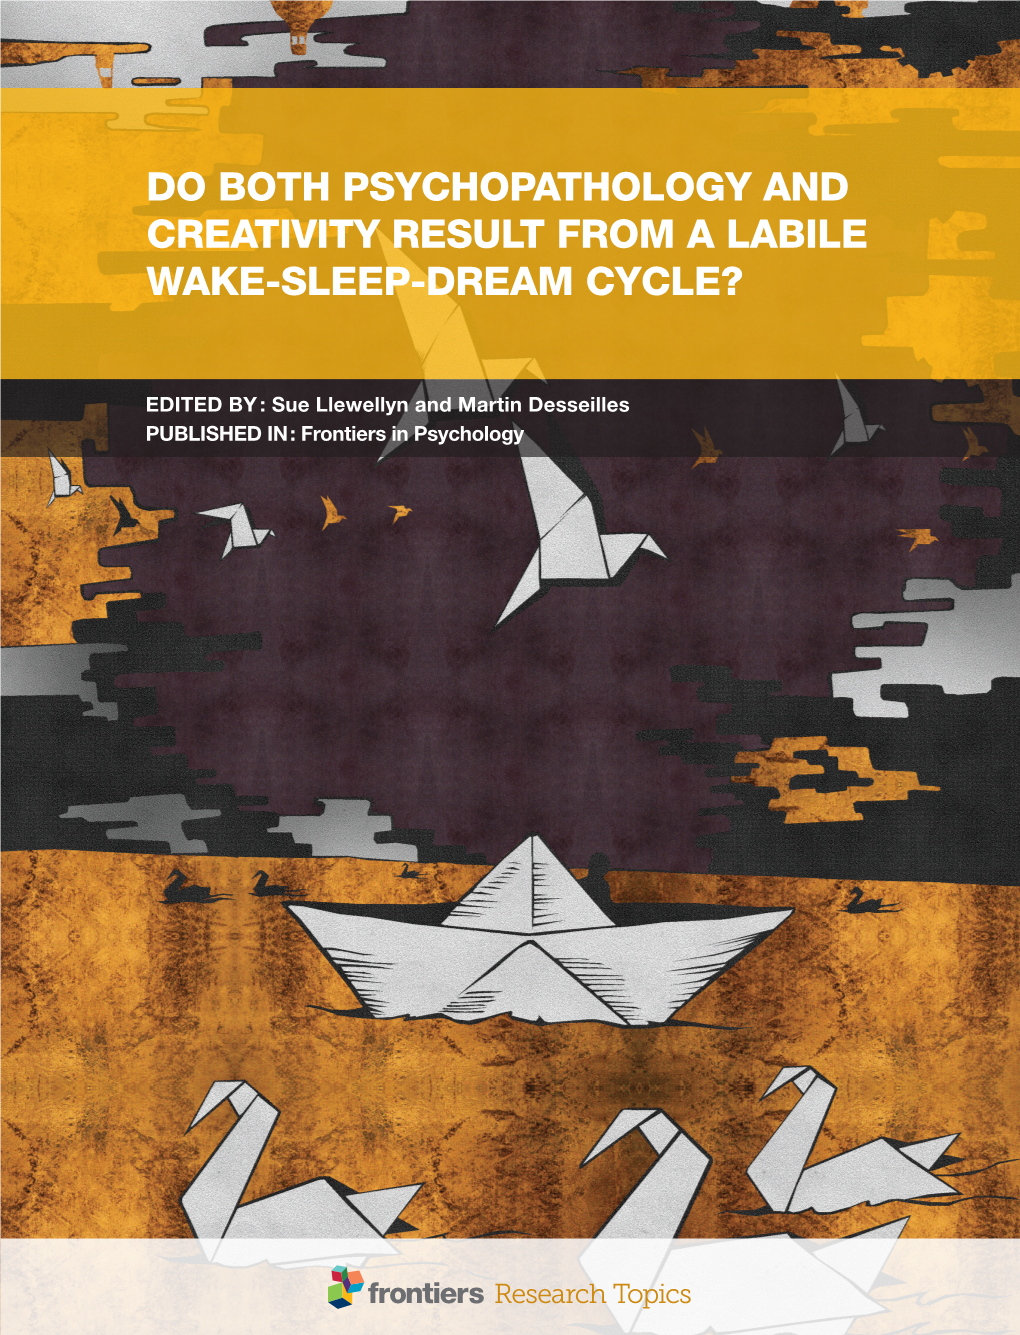 Do Both Psychopathology and Creativity Result from a Labile Wake-Sleep-Dream Cycle?